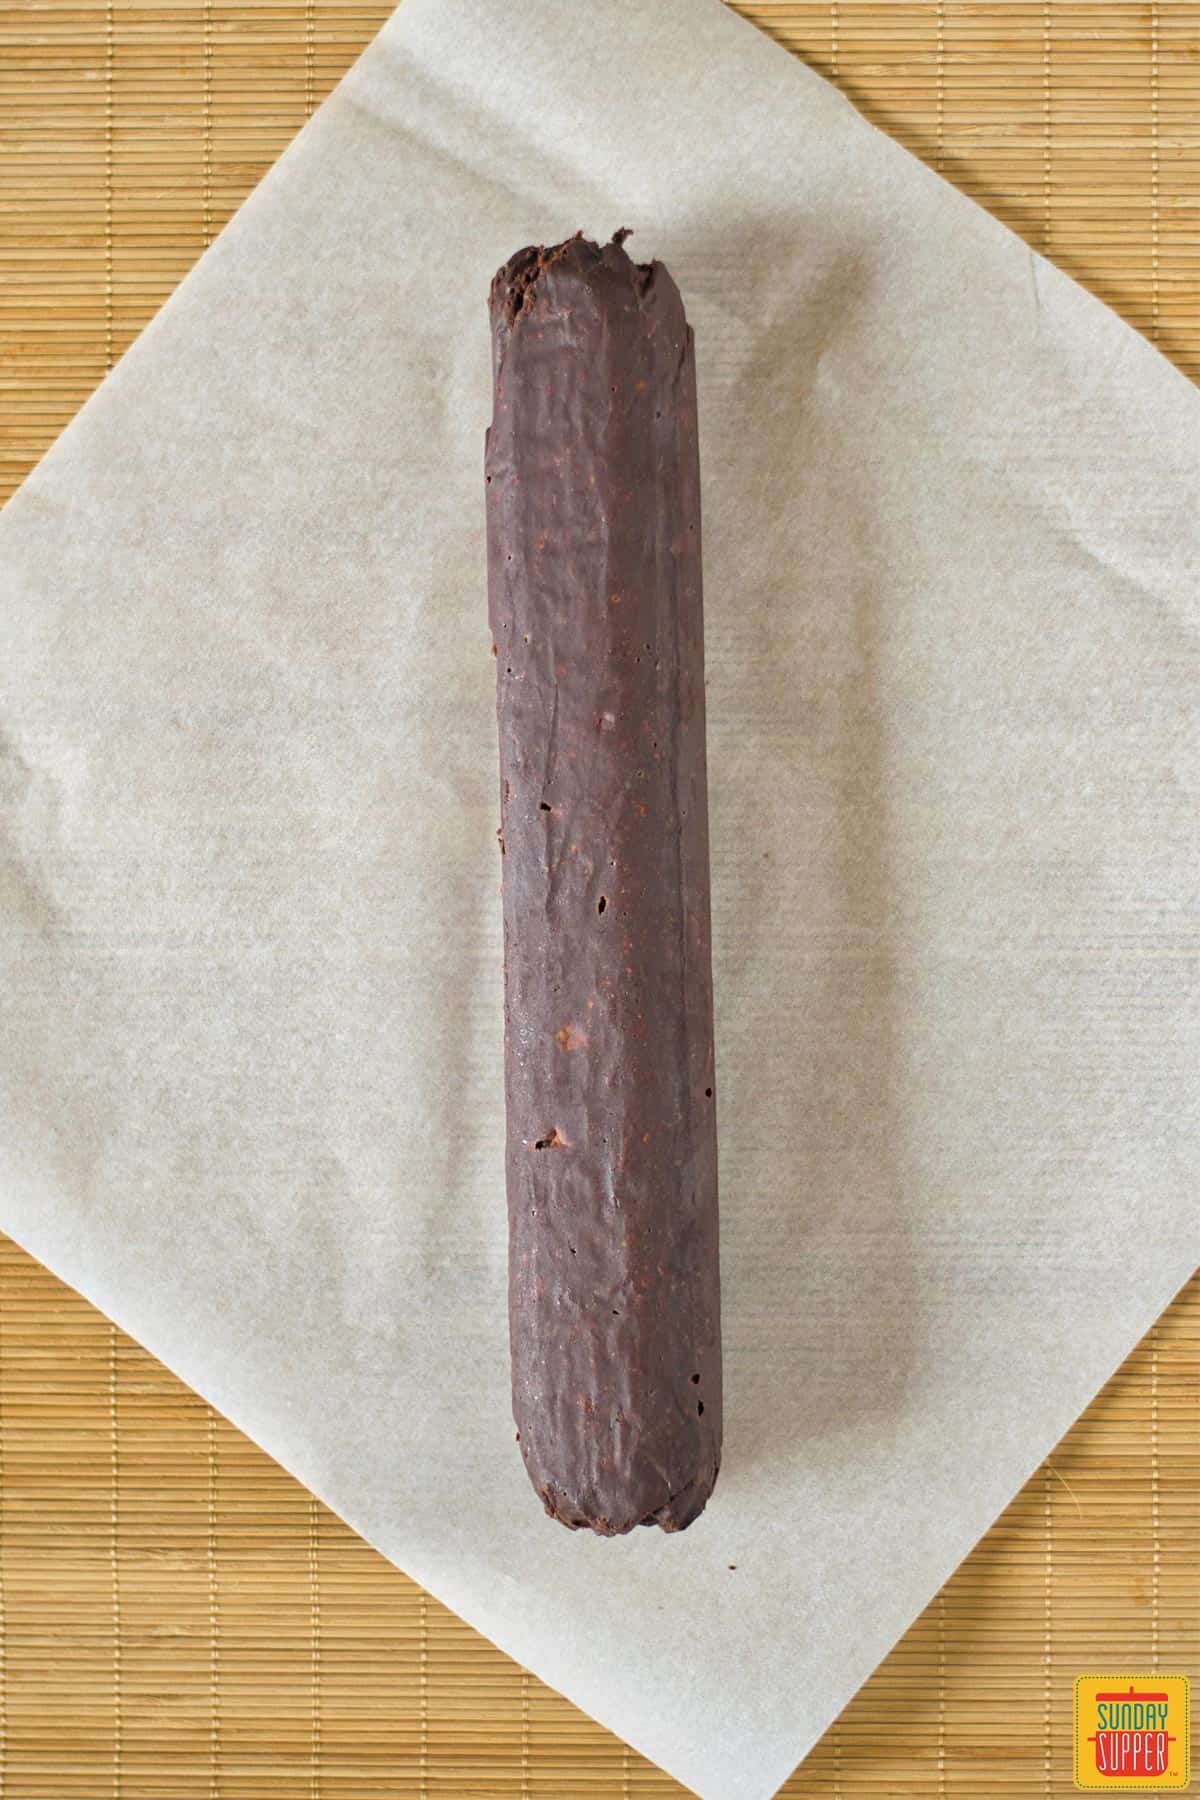 Frozen chocolate salami log ready to be sliced